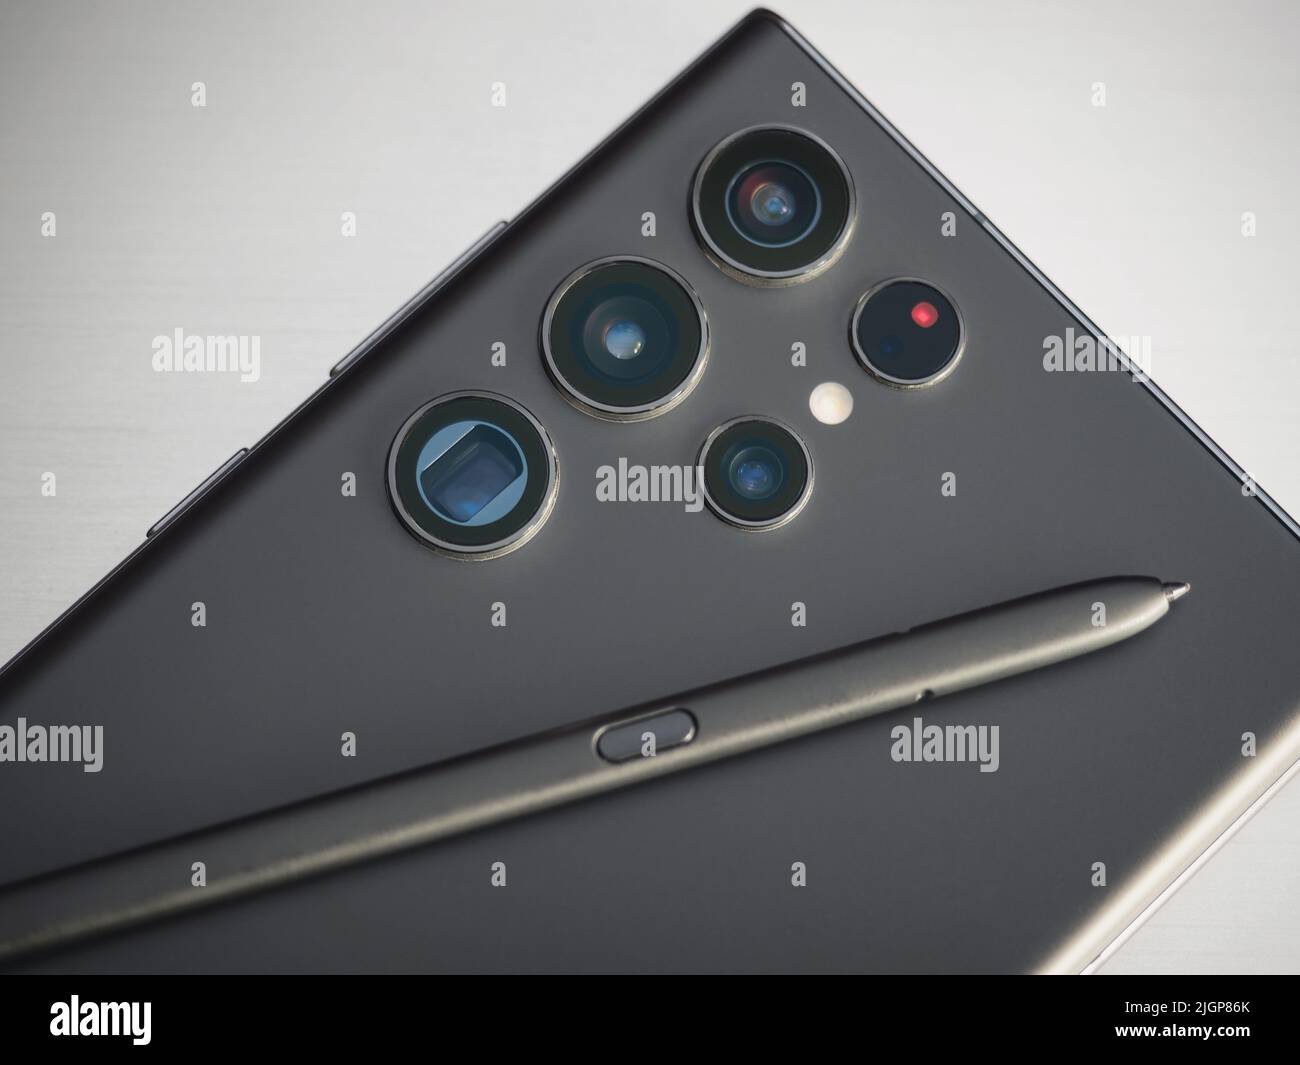 Galati, Romania: June 29, 2022: The new Samsung Galaxy S22 Ultra back with camera lenses and SPen on grey background Stock Photo